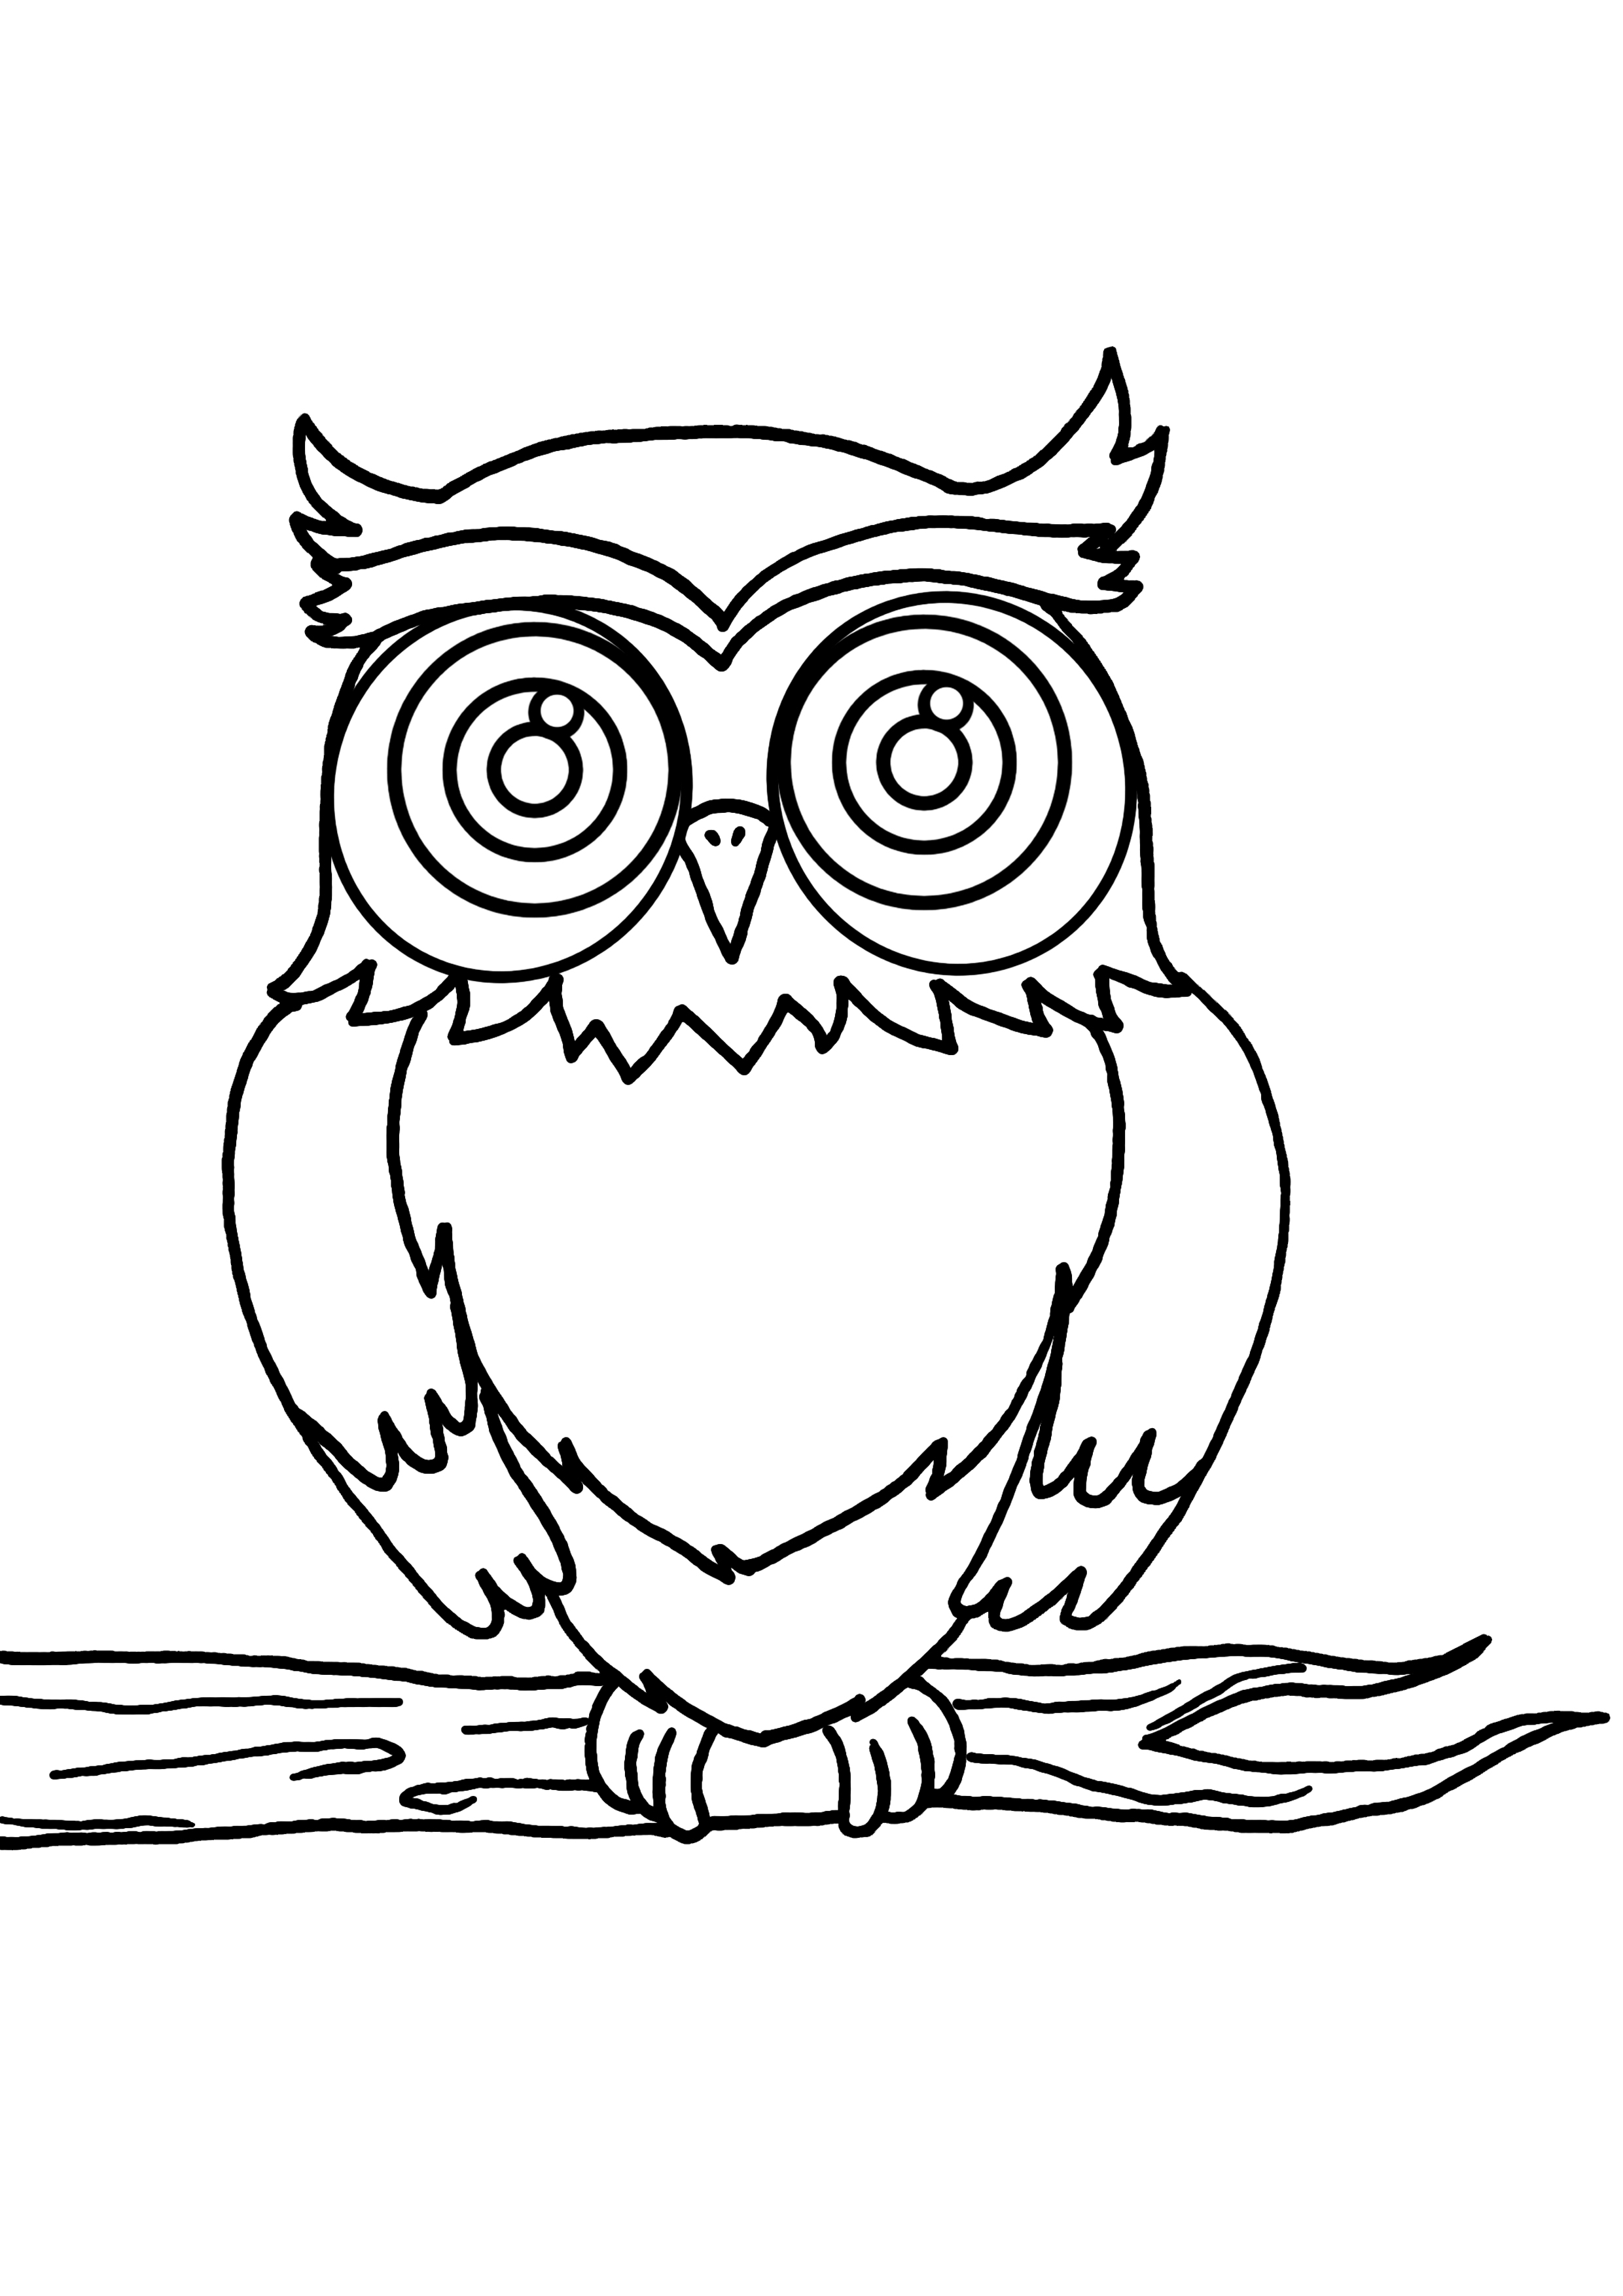 drawings-owl-animals-printable-coloring-pages